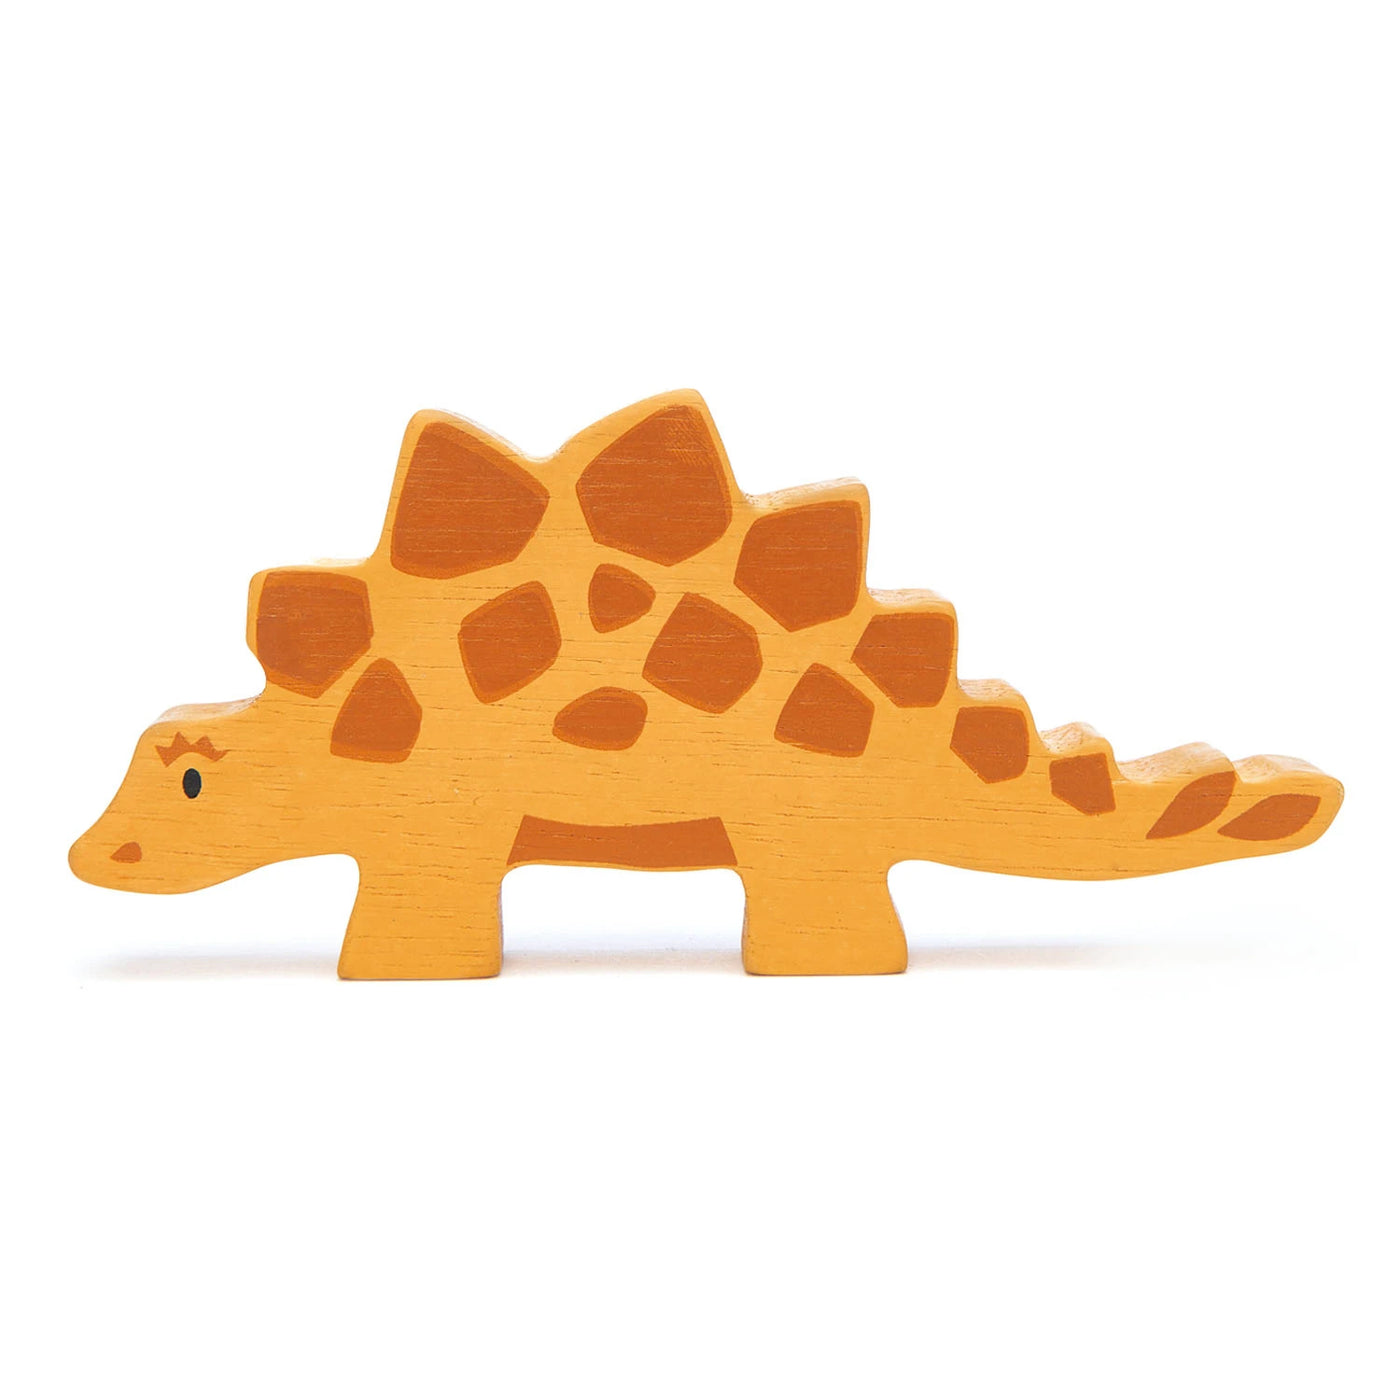 Wooden stegosaurus toy dinosaur for kids made of eco-friendly wood